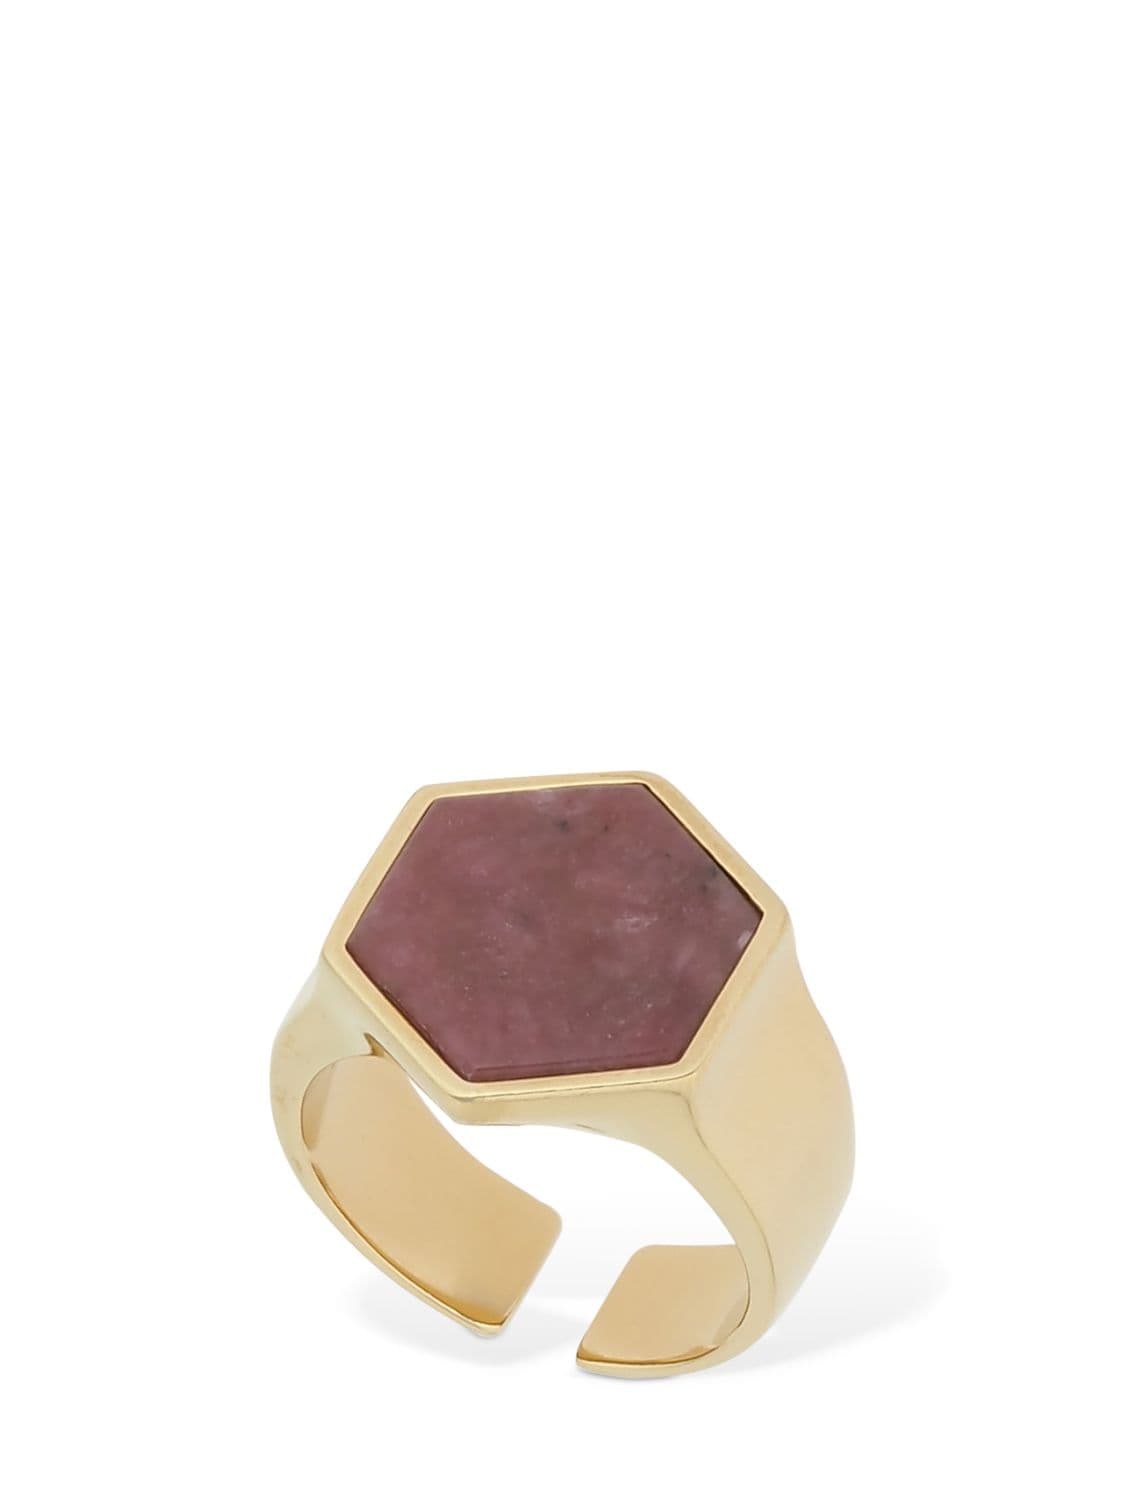 ISABEL MARANT GOLDEN MOTHER HEXAGONAL RING W/ STONE,71I9M7015-NDBQSW2